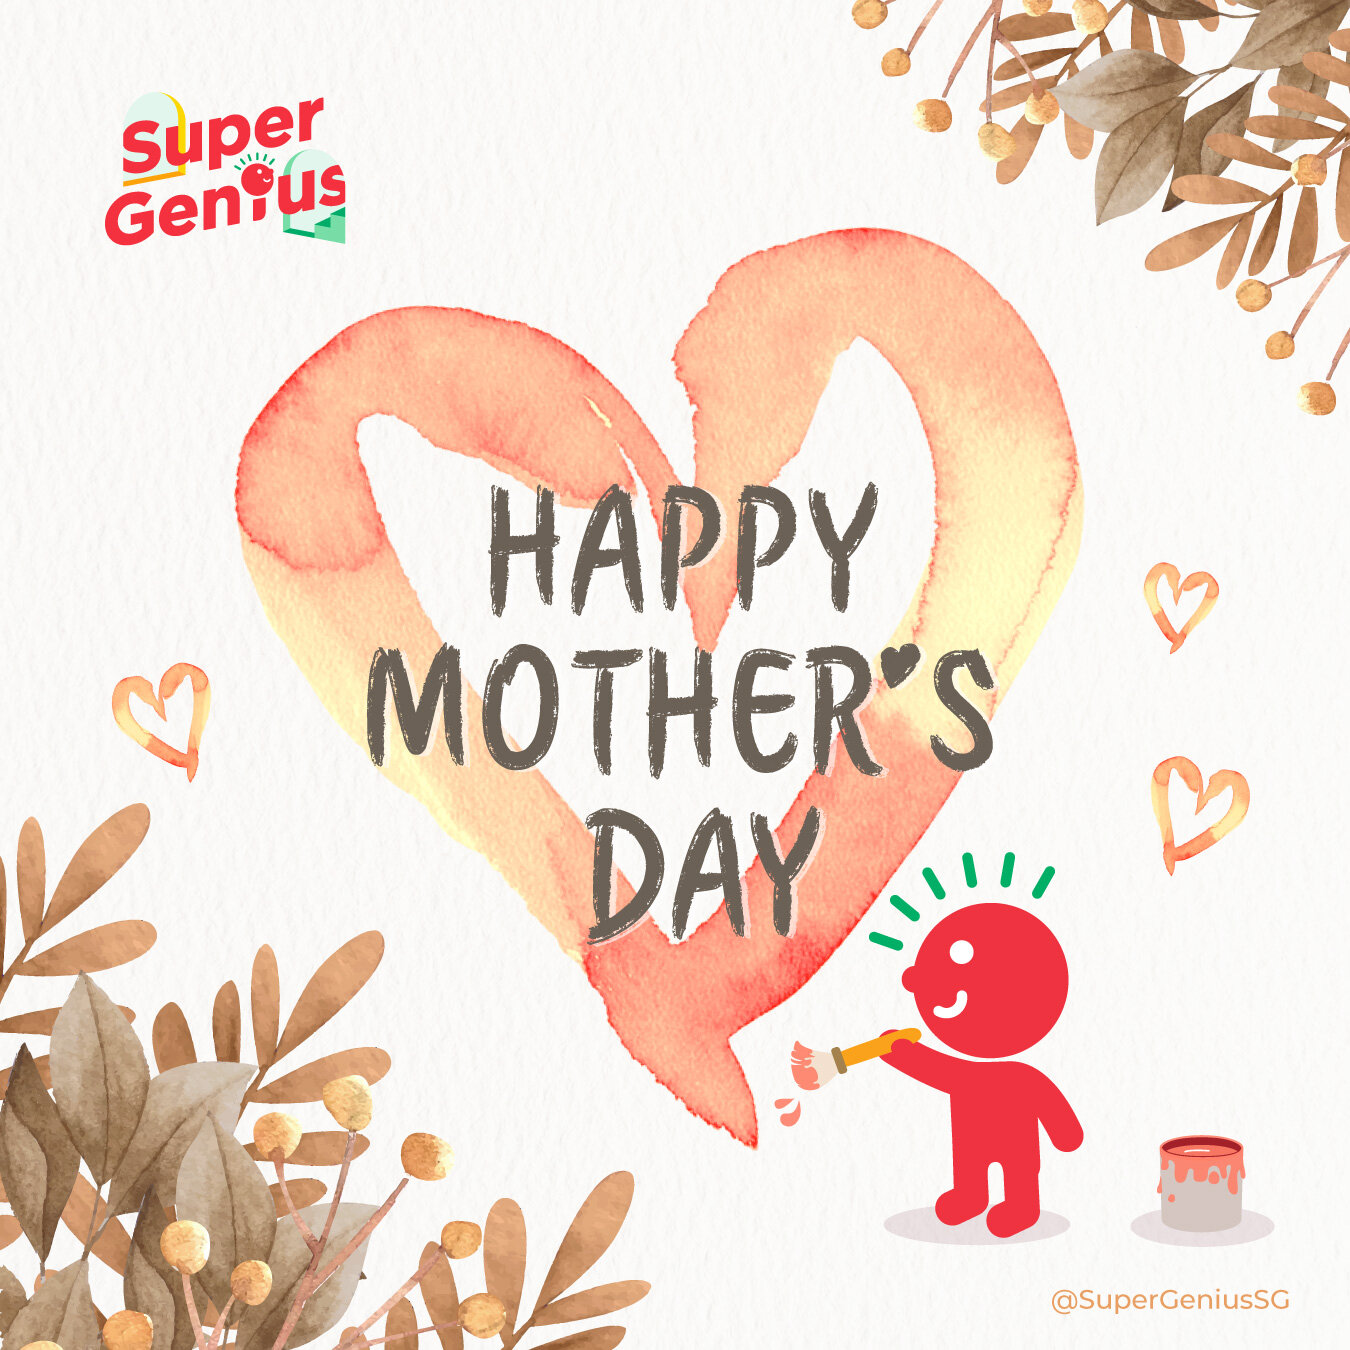 Sending love and gratitude to all the moms on this special day. Thank you for everything!❤️

#HappyMothersDay
#SuperGeniusSG
#LearnCreateShareJoyfully